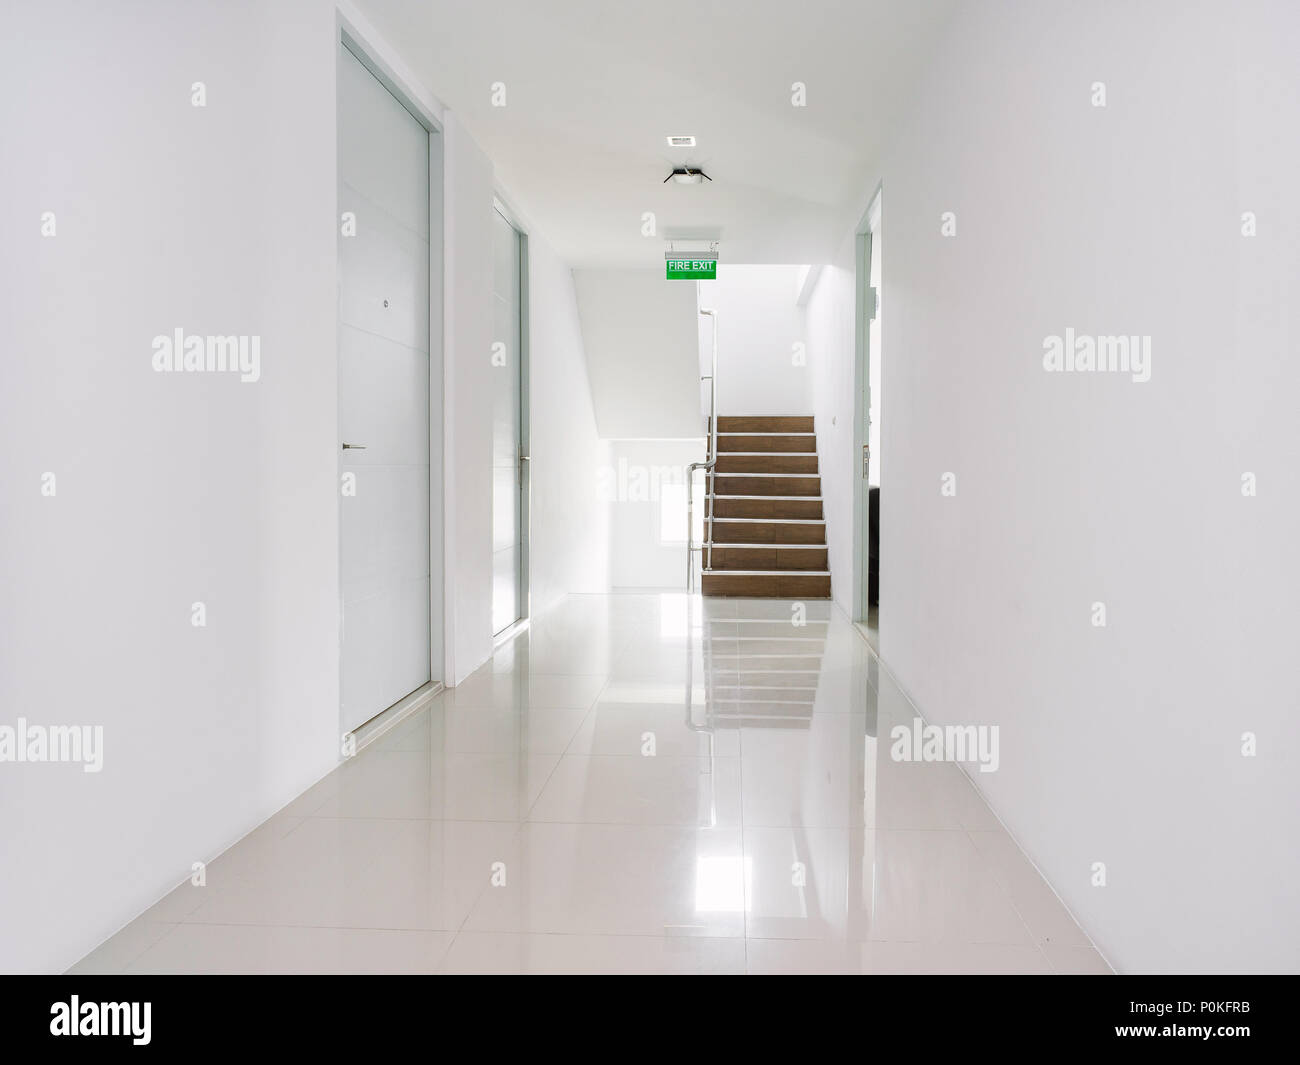 White corridor of the modern building with the exit sign in green and the stair at the end of walkway Stock Photo